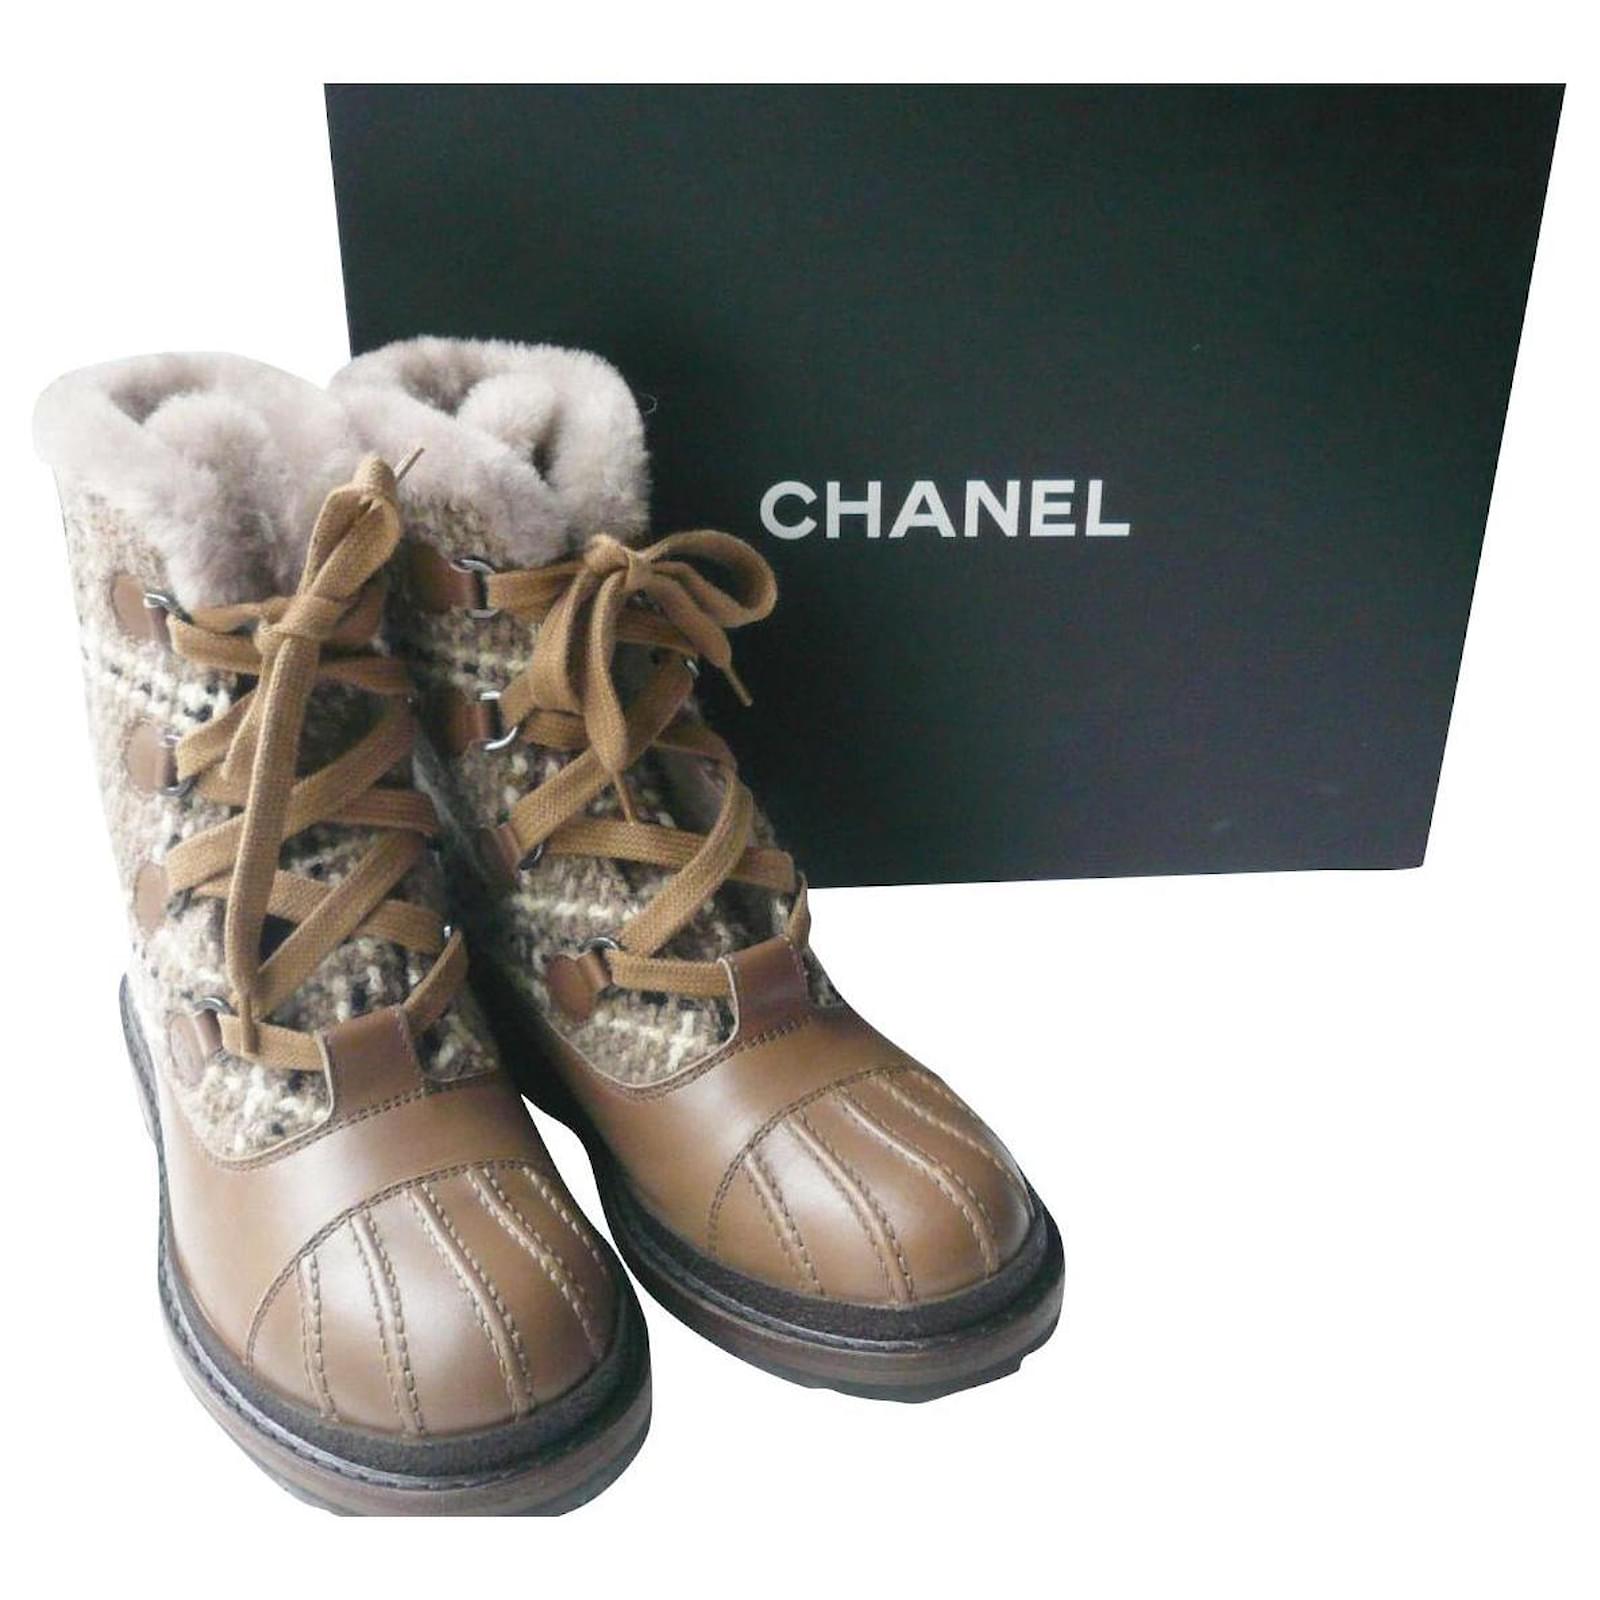 65326 auth CHANEL cream leather 2020 SHEARLING LINED LACE UP Boots Shoes  37.5